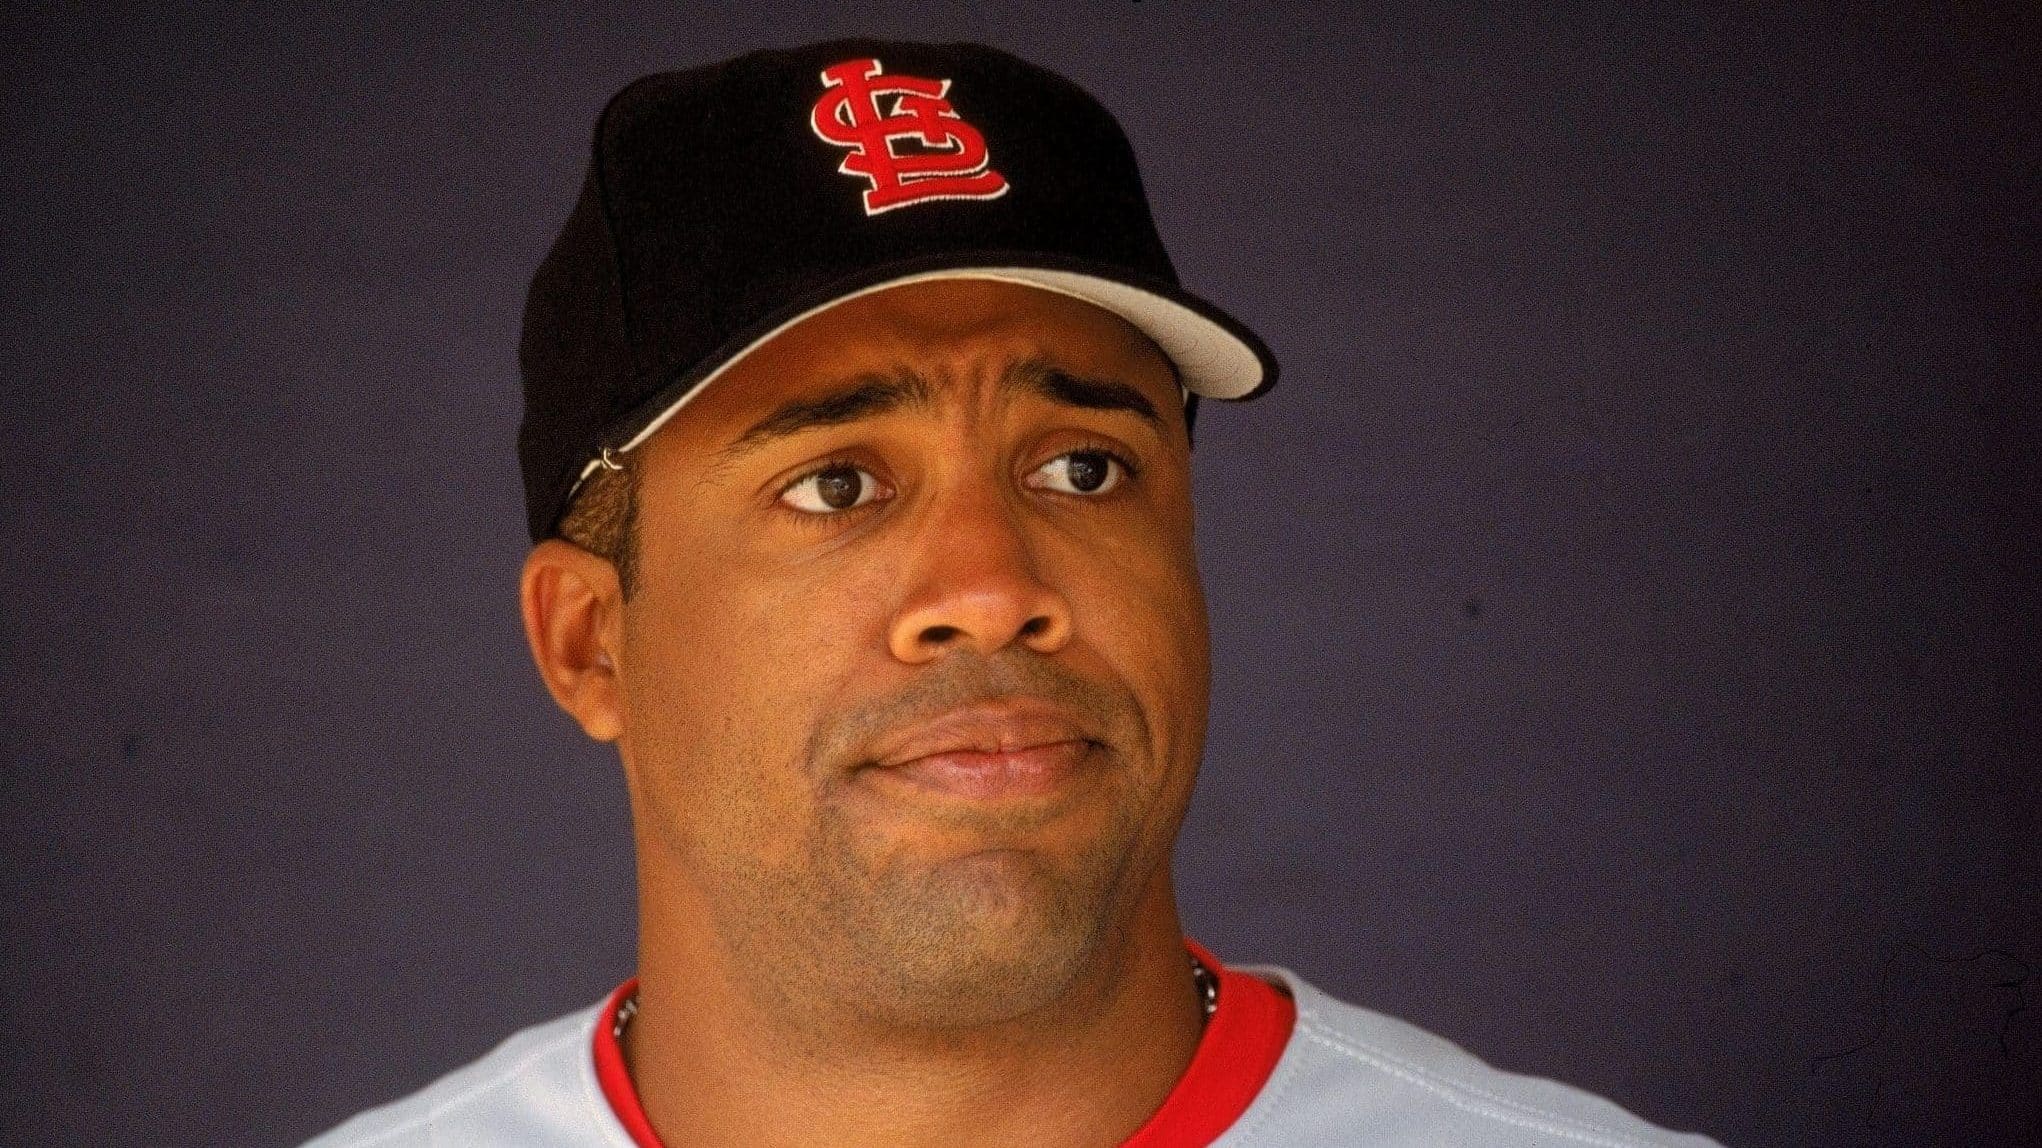 28 Sep 2000: Eduardo Perez #33 of the St. Louis Cardinals looks on from the dugout during the game against the San Diego Padres at the Qualcomm Stadium in San Diego, California. The Cardinals defeated the Padres 7-6.